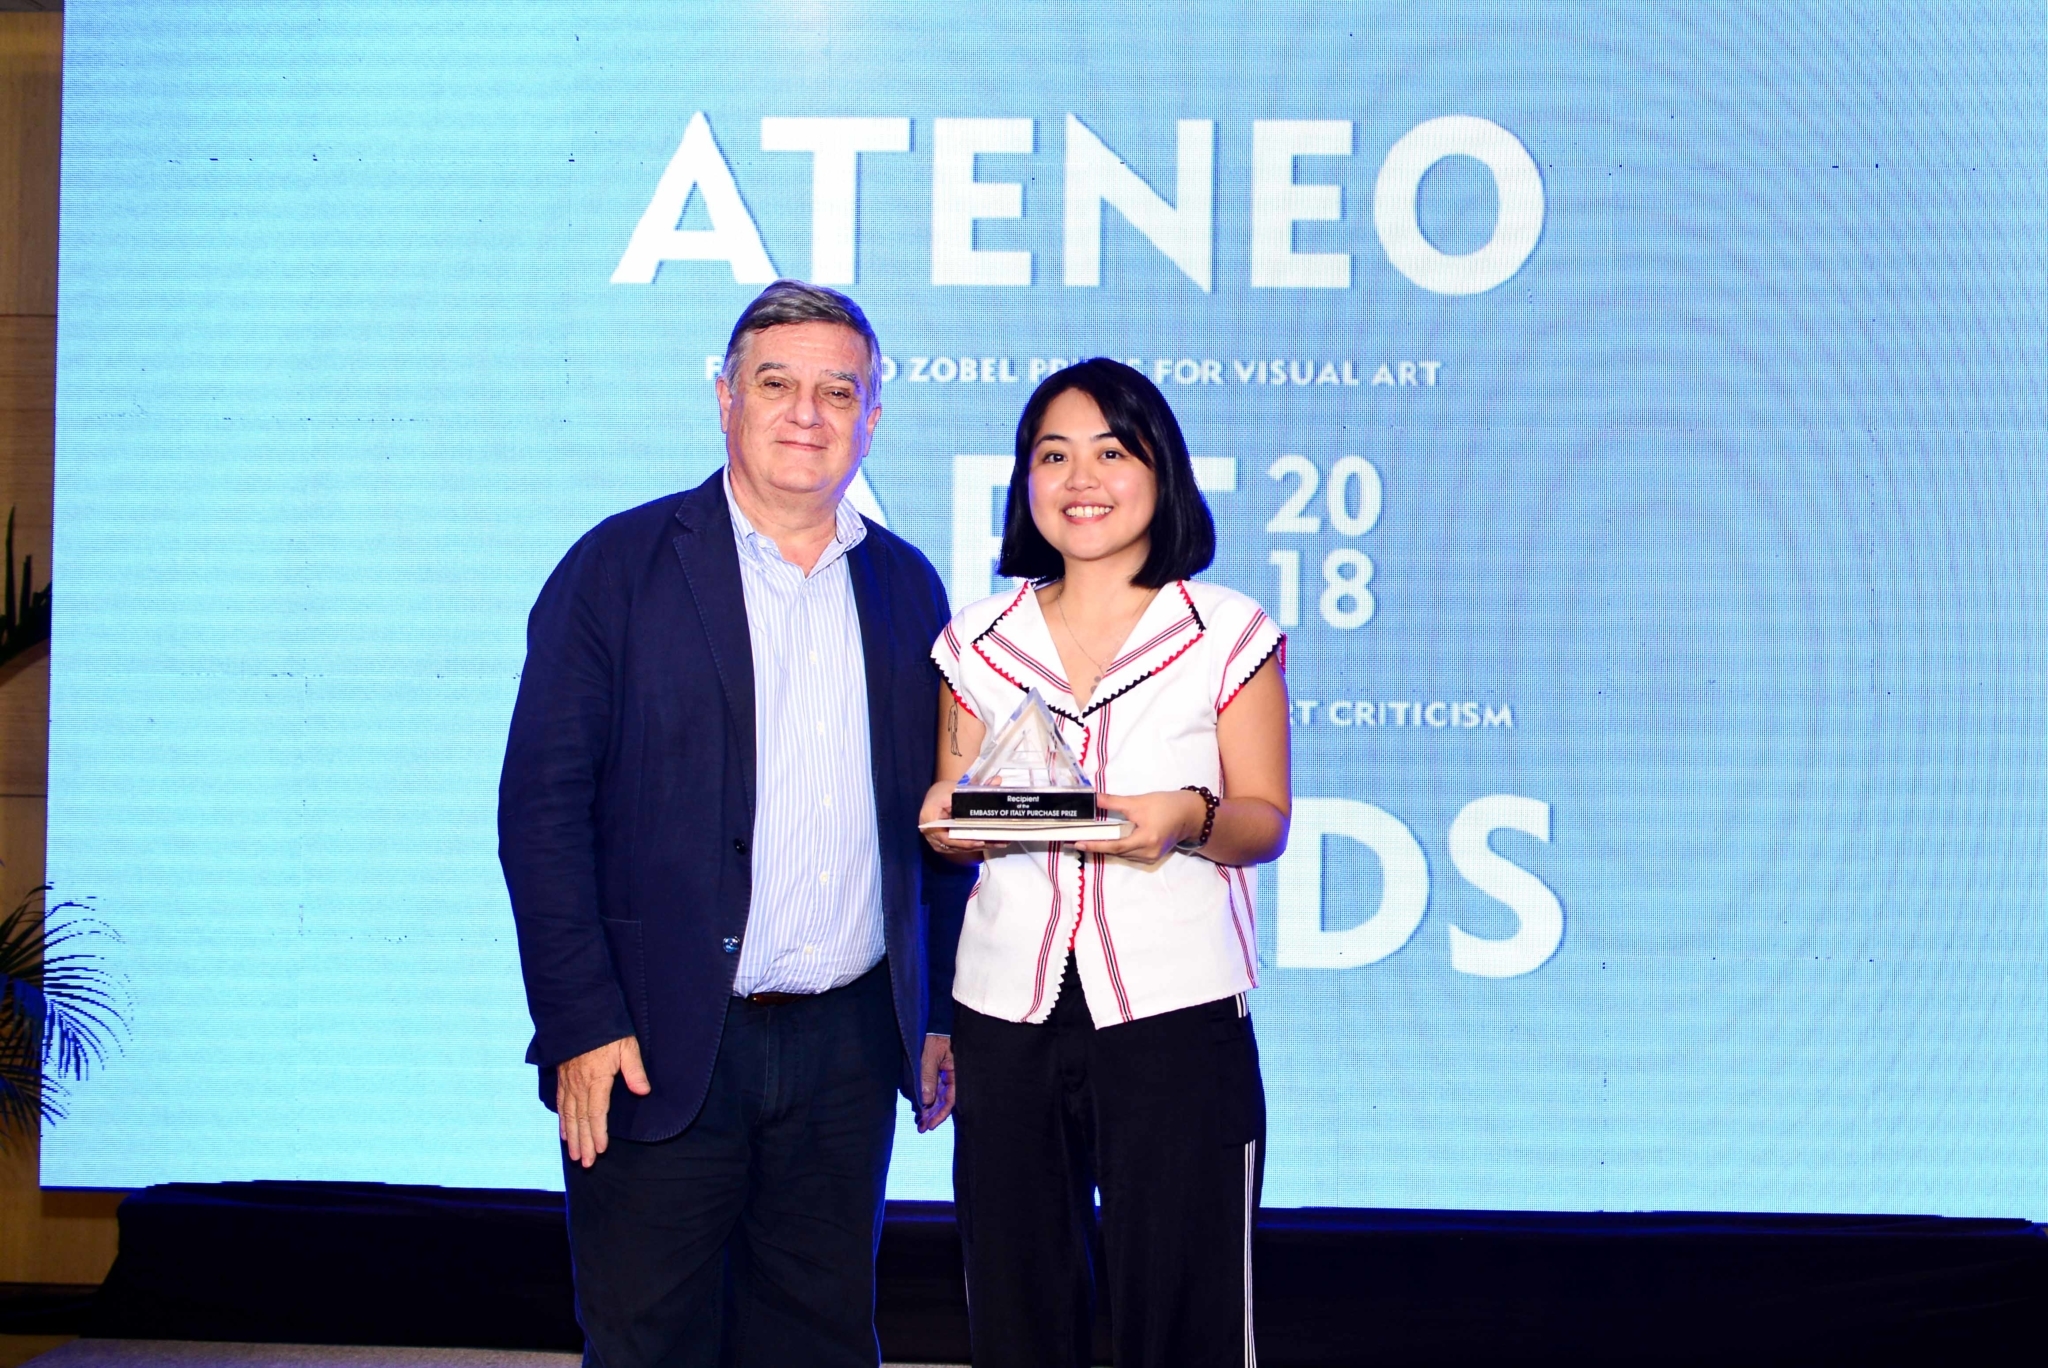 Jel Suarez is the recipient of the Ateneo Art Awards 2018 - Embassy of Italy Purchase Prize